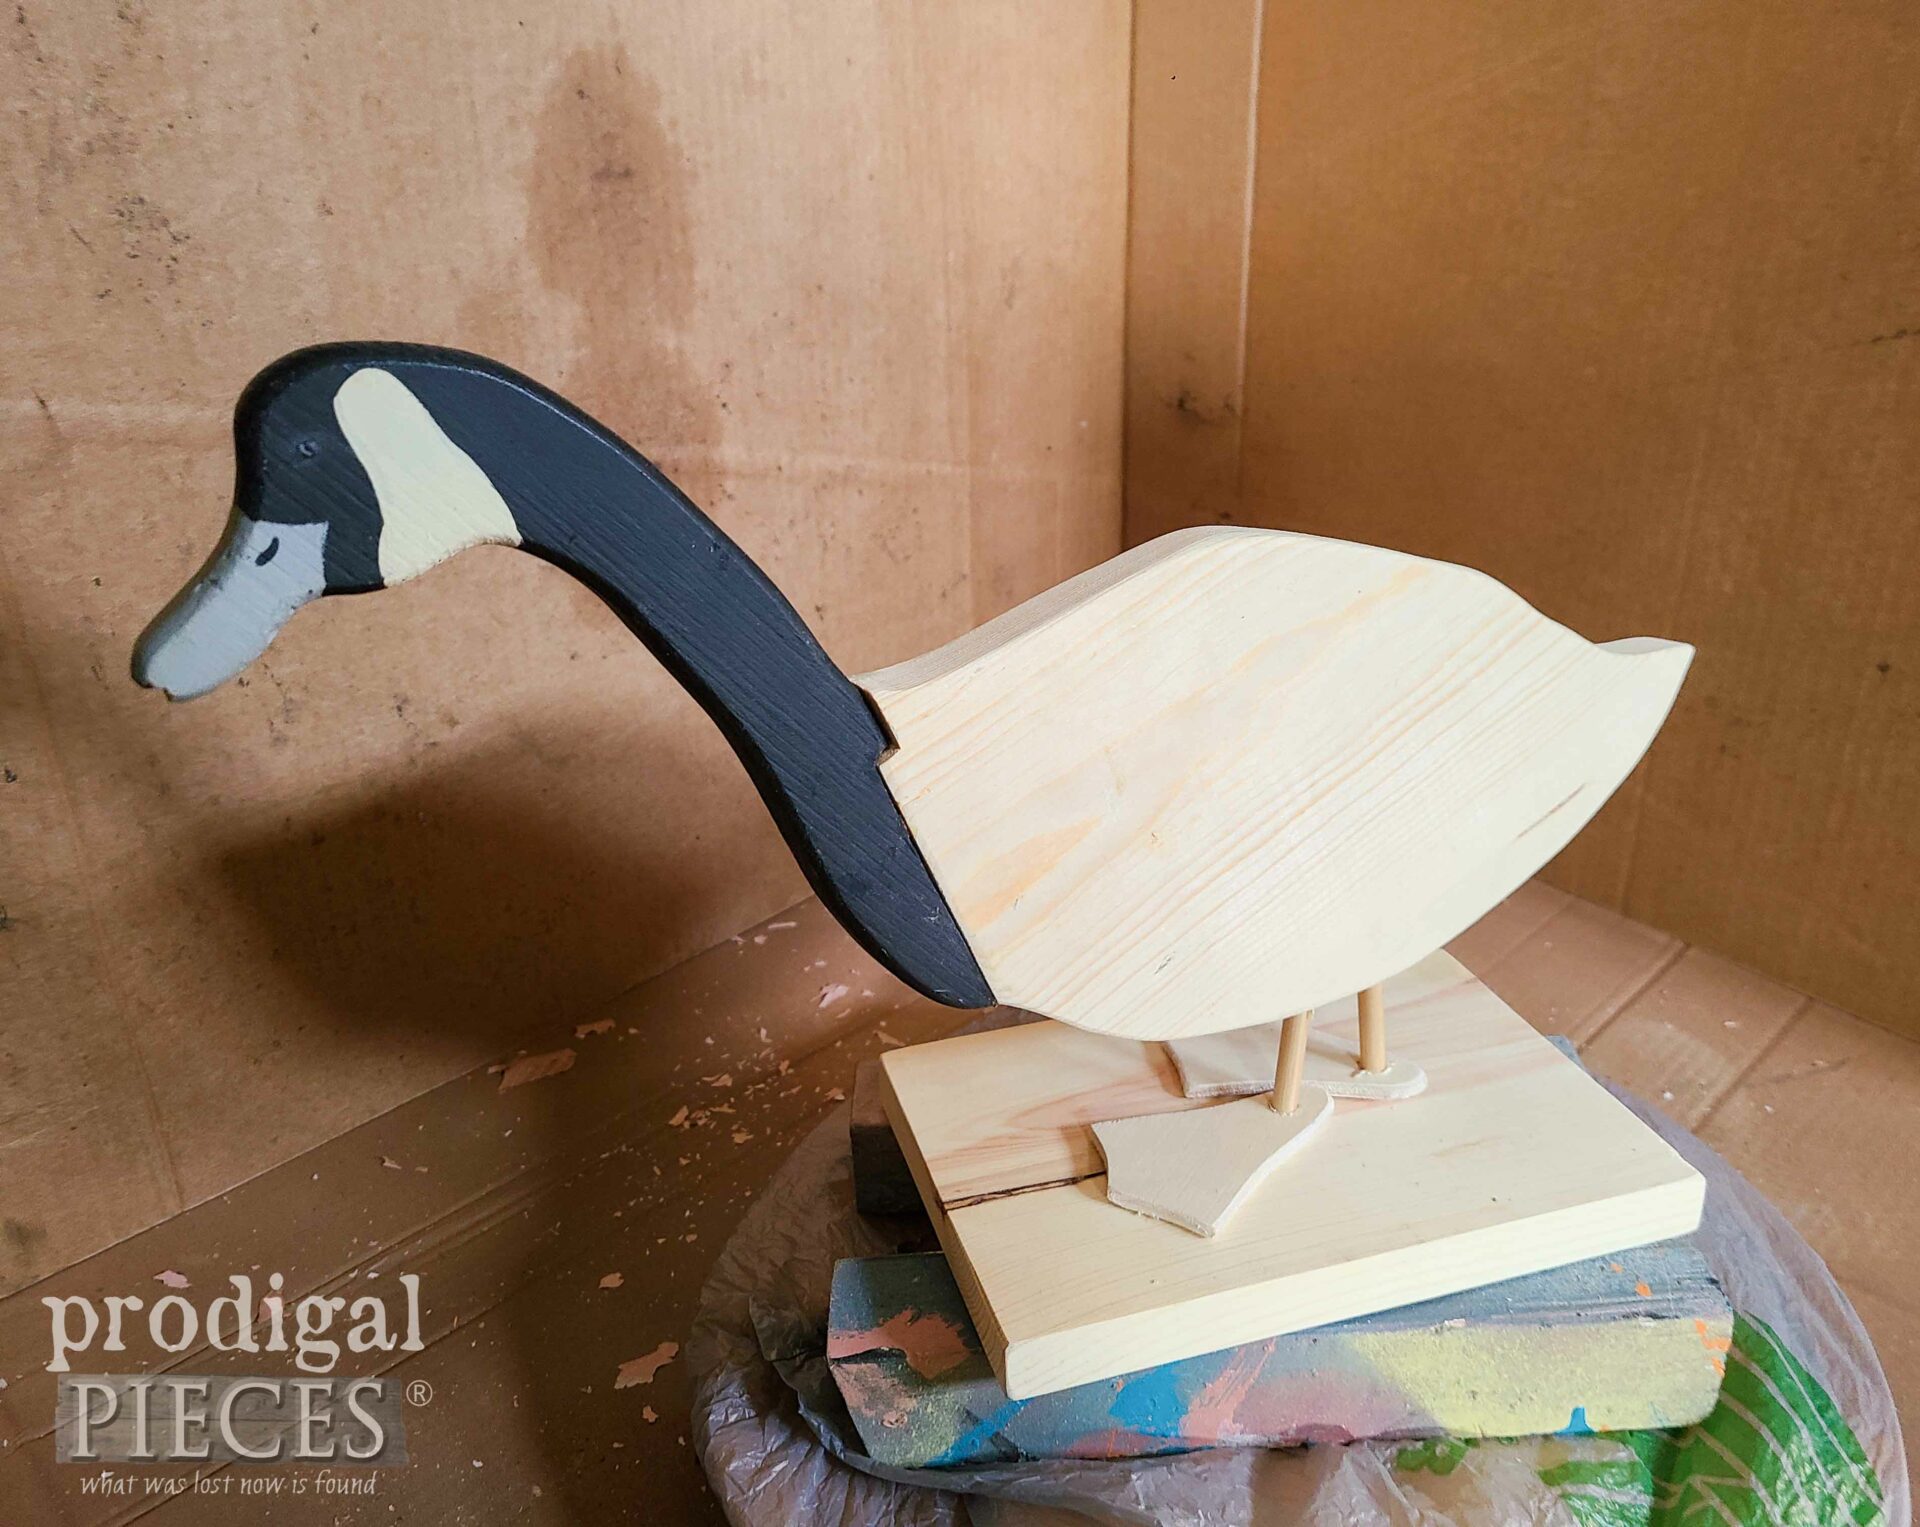 Handmade Built Wooden Goose for Shabby Chic Goose by Larissa of Prodigal Pieces | prodigalpieces.com #prodigalpieces